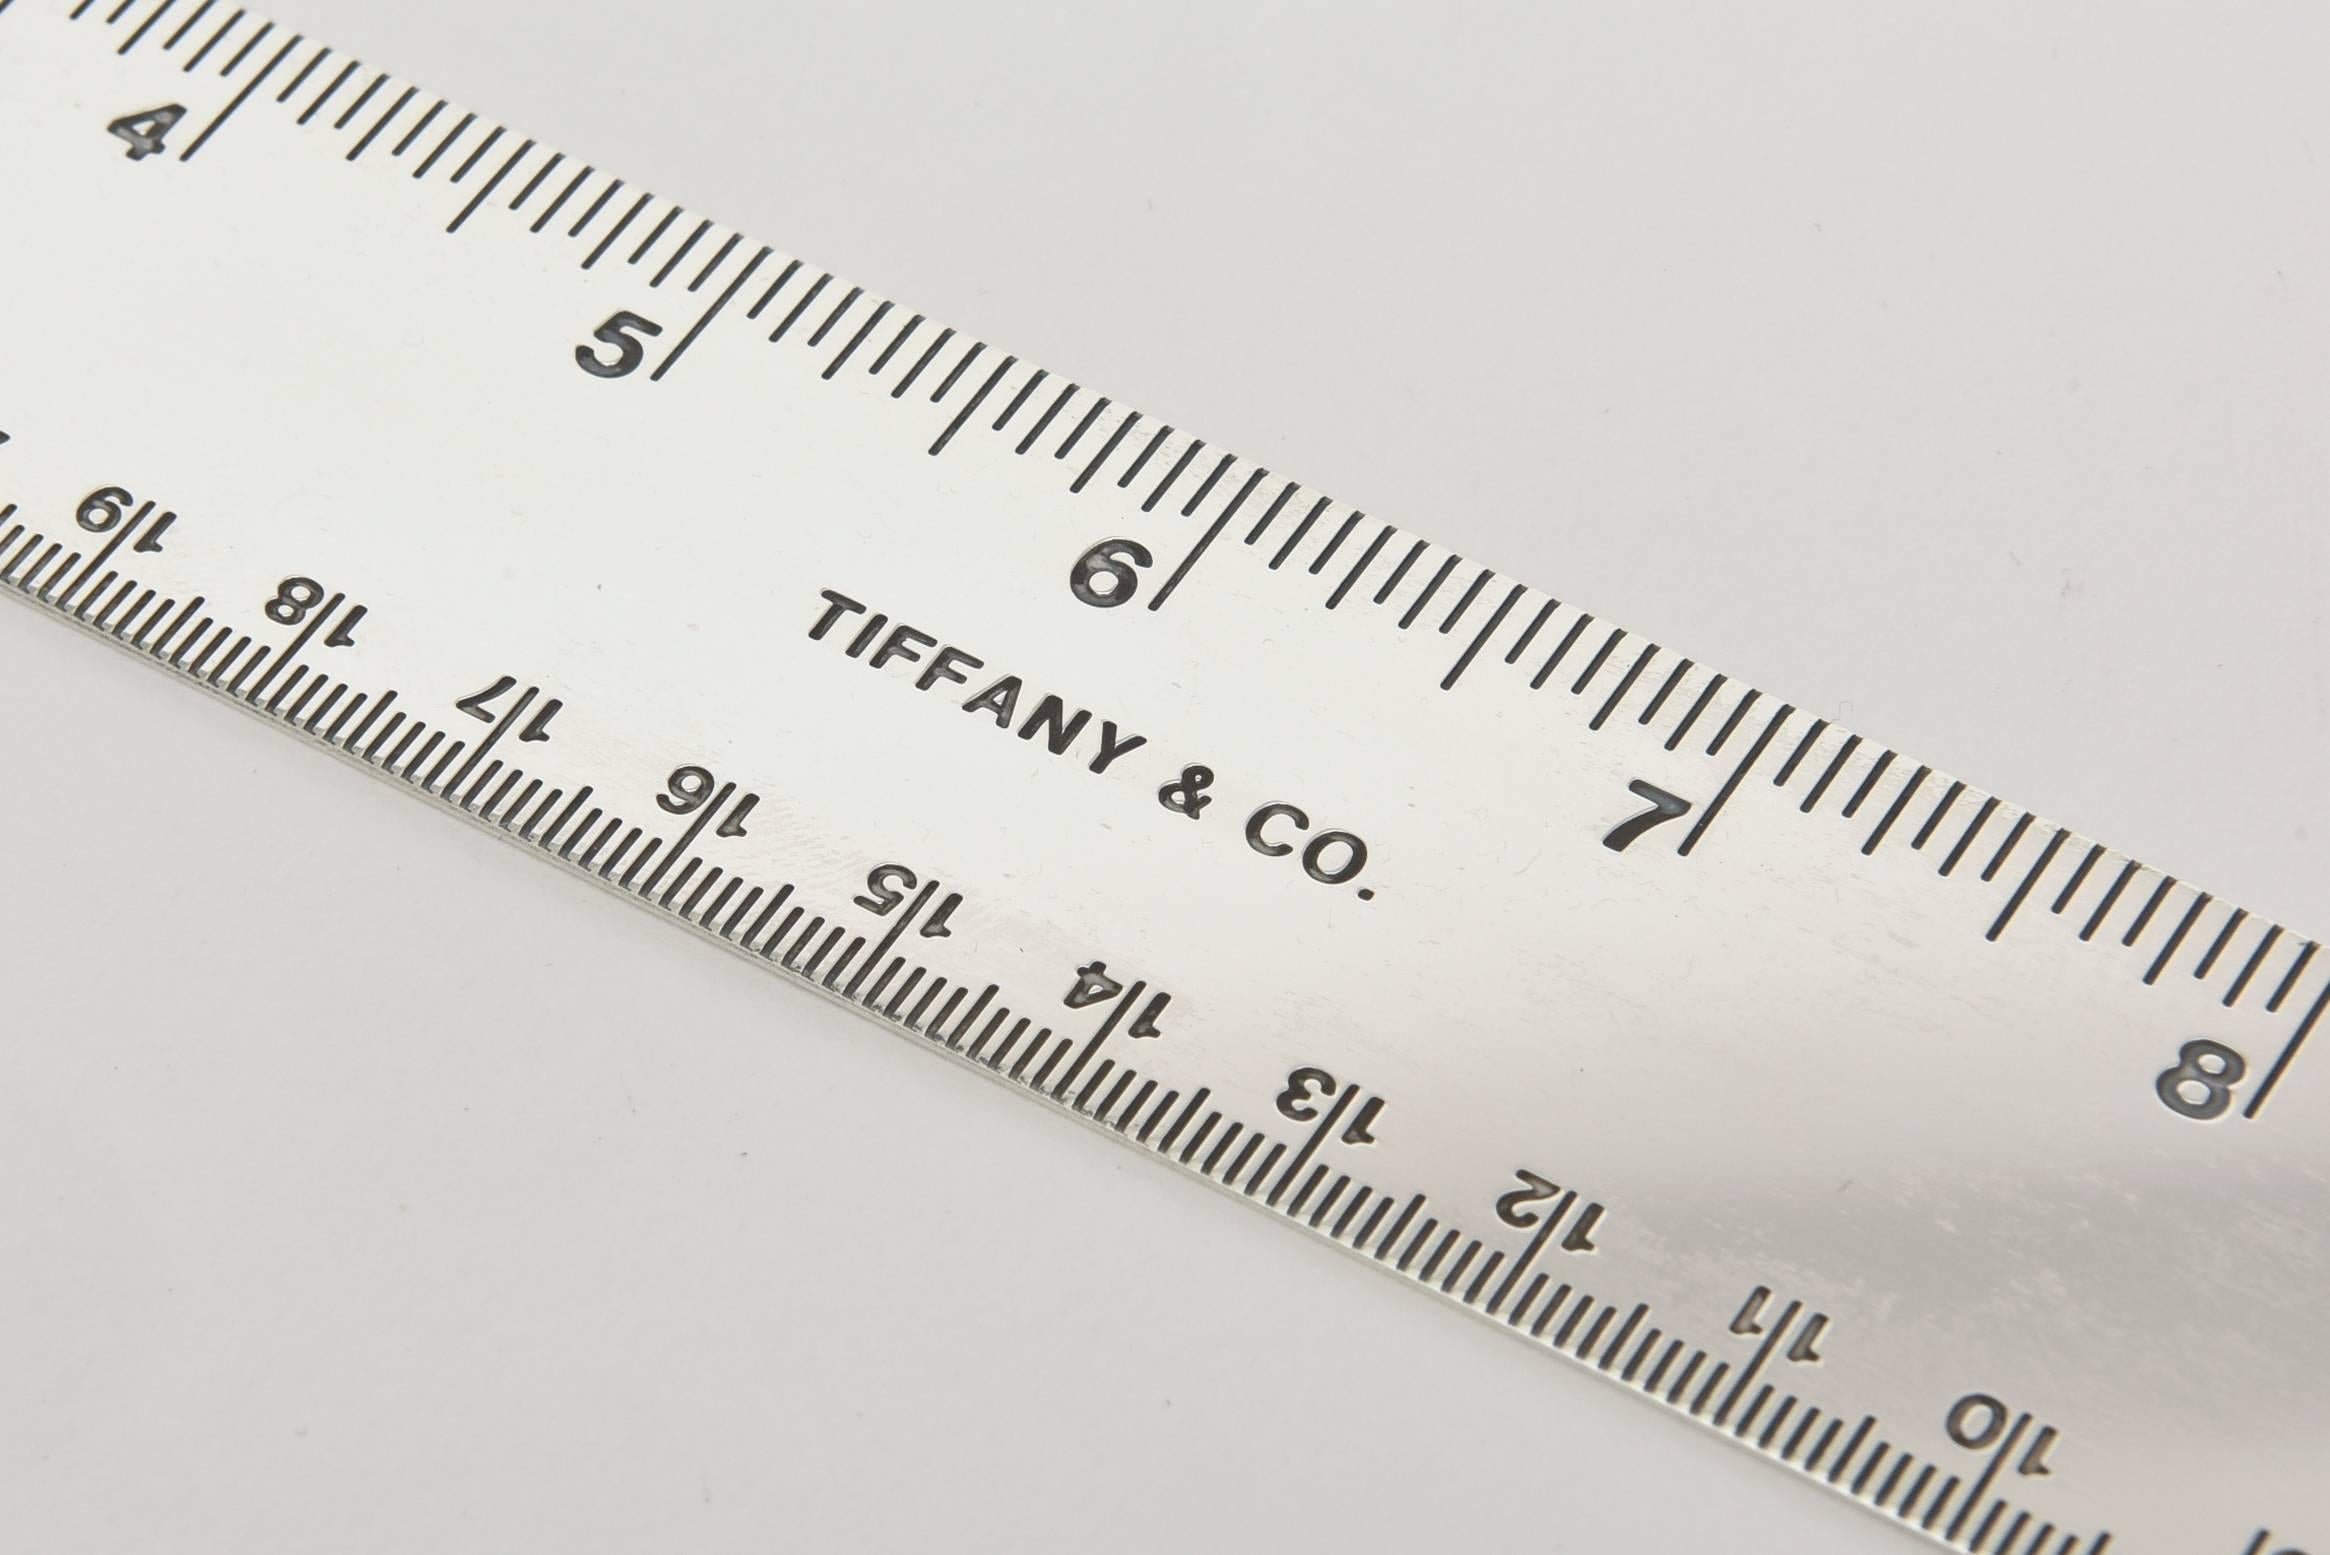 This Tiffany and Co. classic sterling silver ruler has its own original felt dust cover.
What a great desk accessory.
Tiffany has discontinued these a long time ago.
